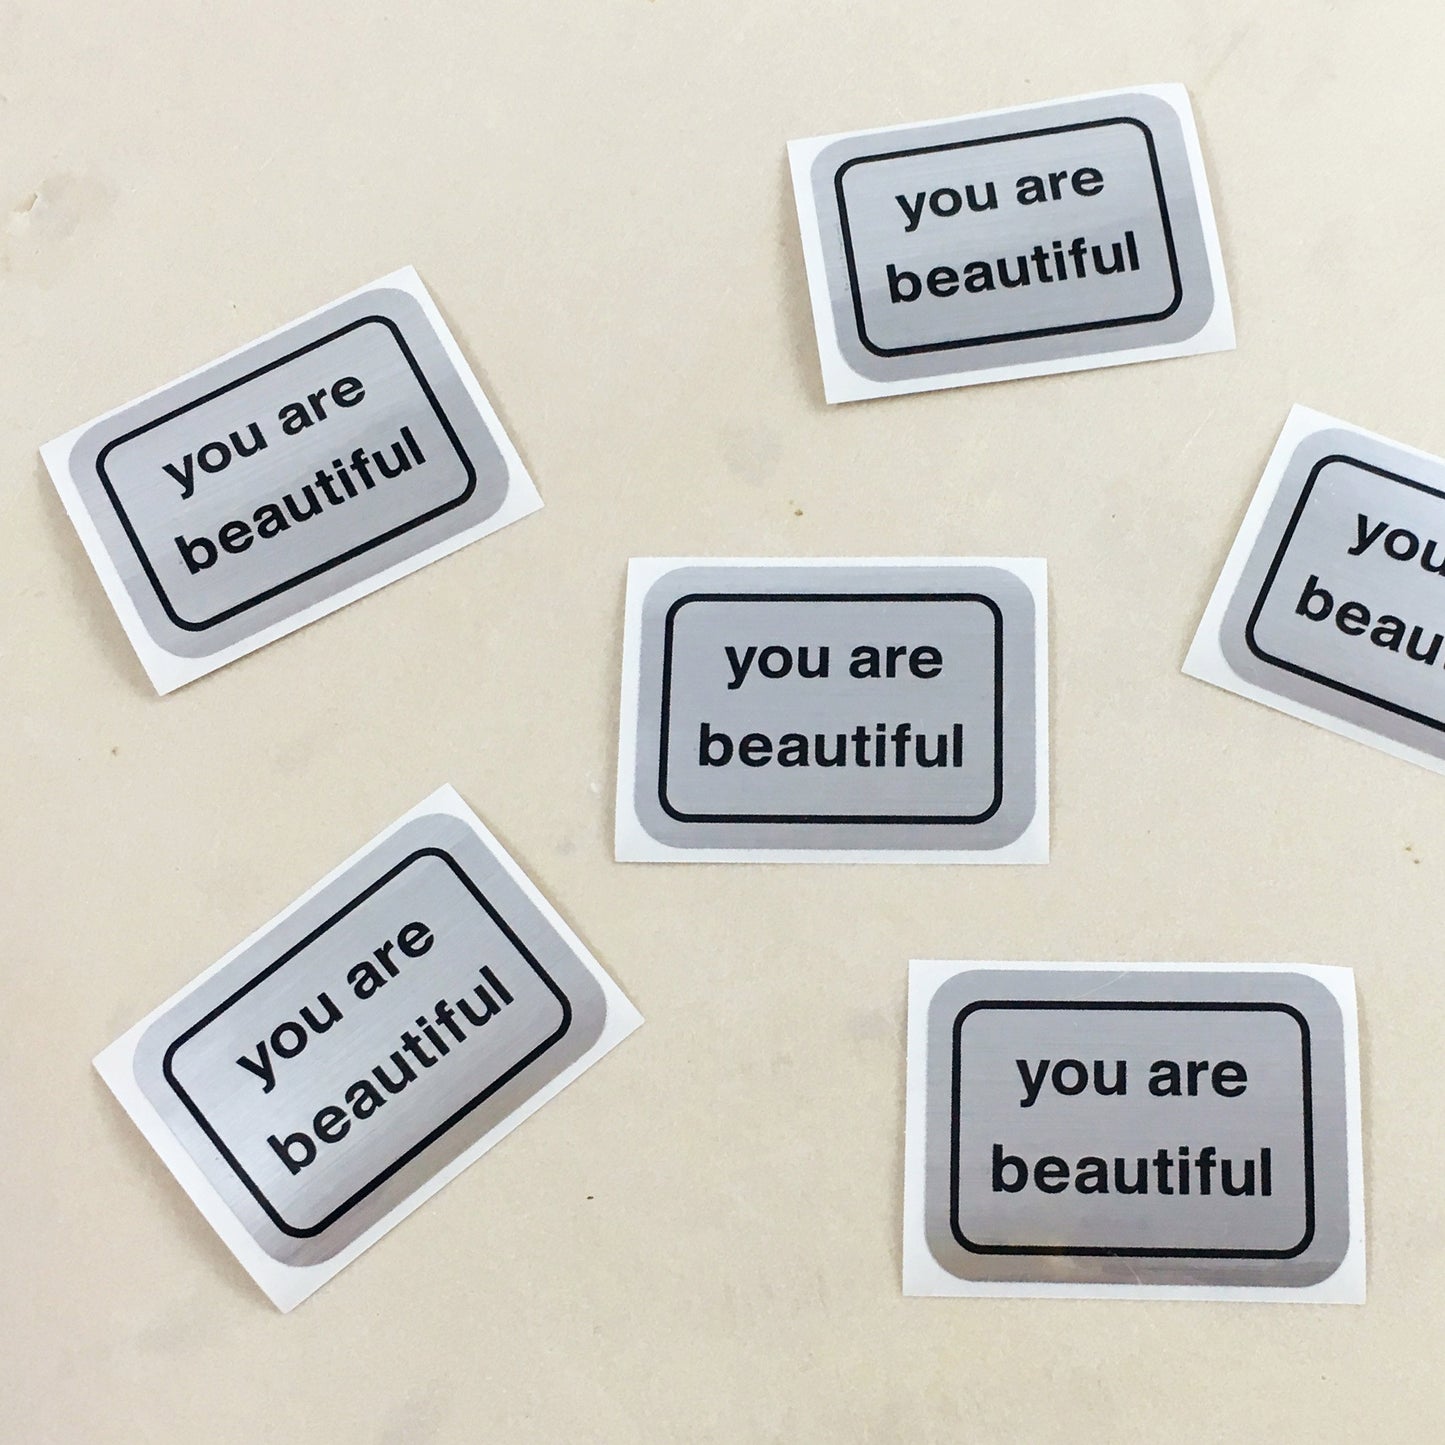 Add a You Are Beautiful Sticker to Your Gift!